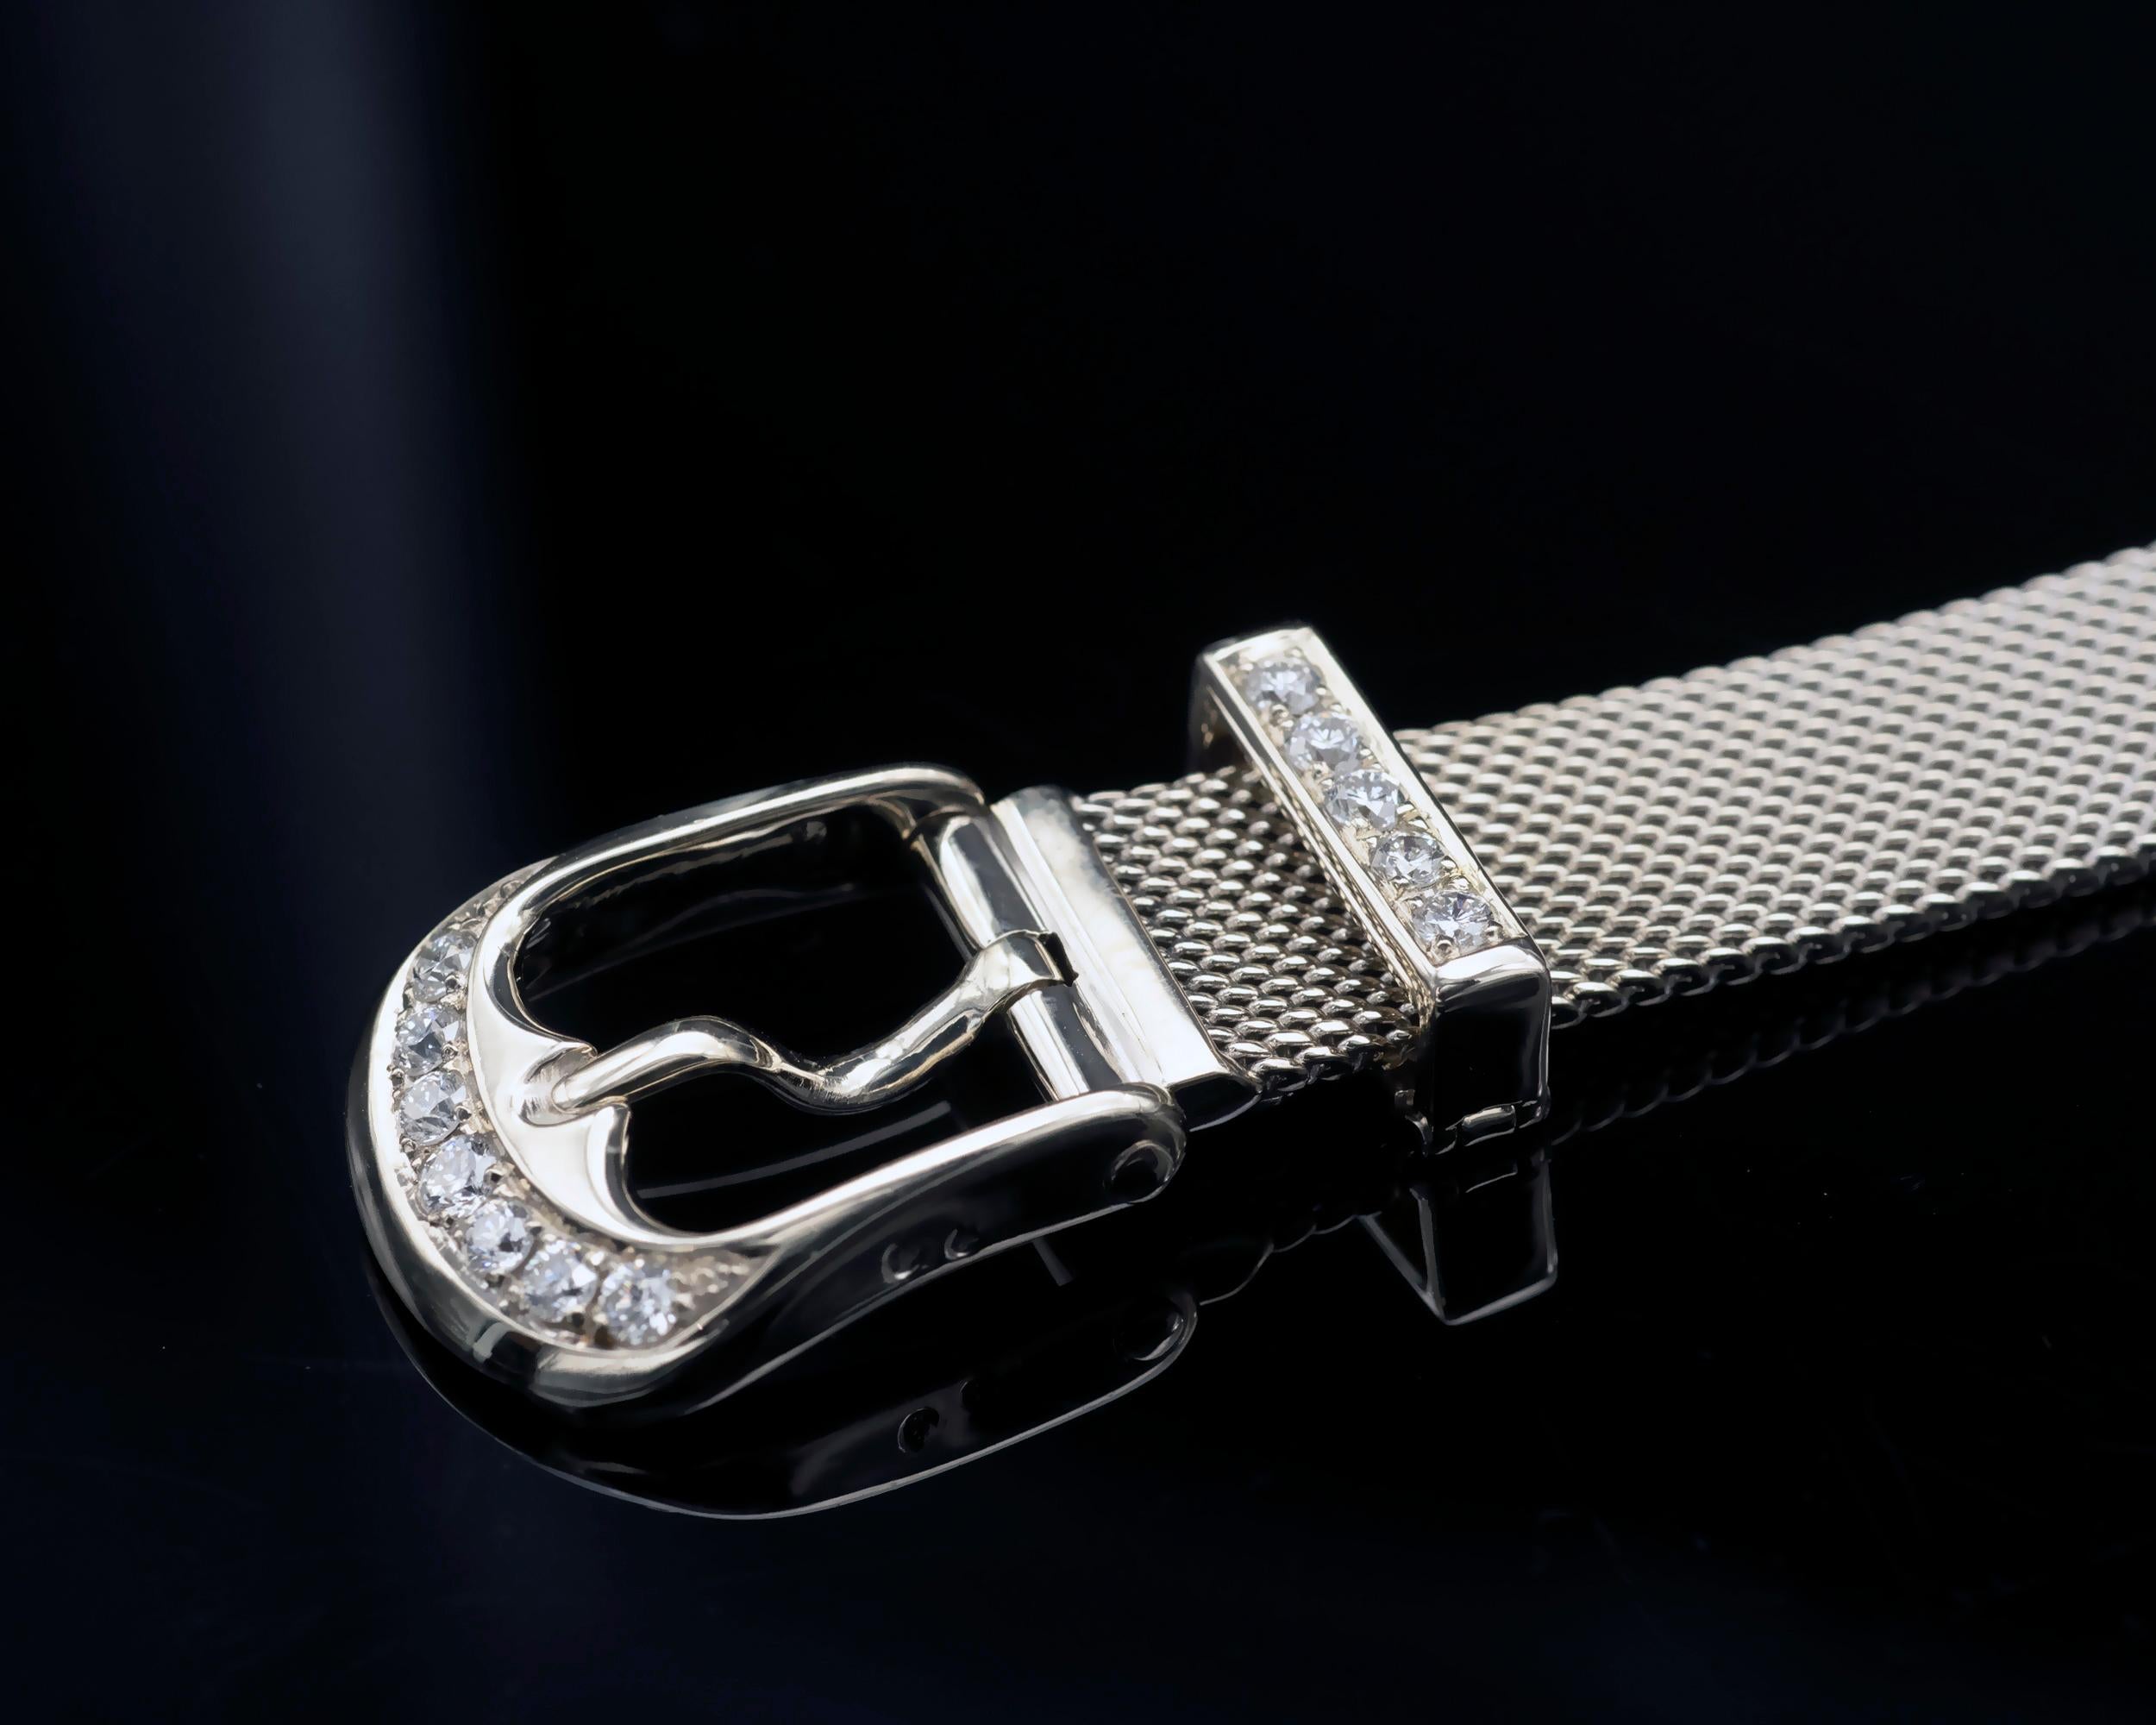 Introducing this exquisite and trendy 18 karat white gold belt buckle bracelet. The flexible design gracefully wraps around your wrist. At its end the 